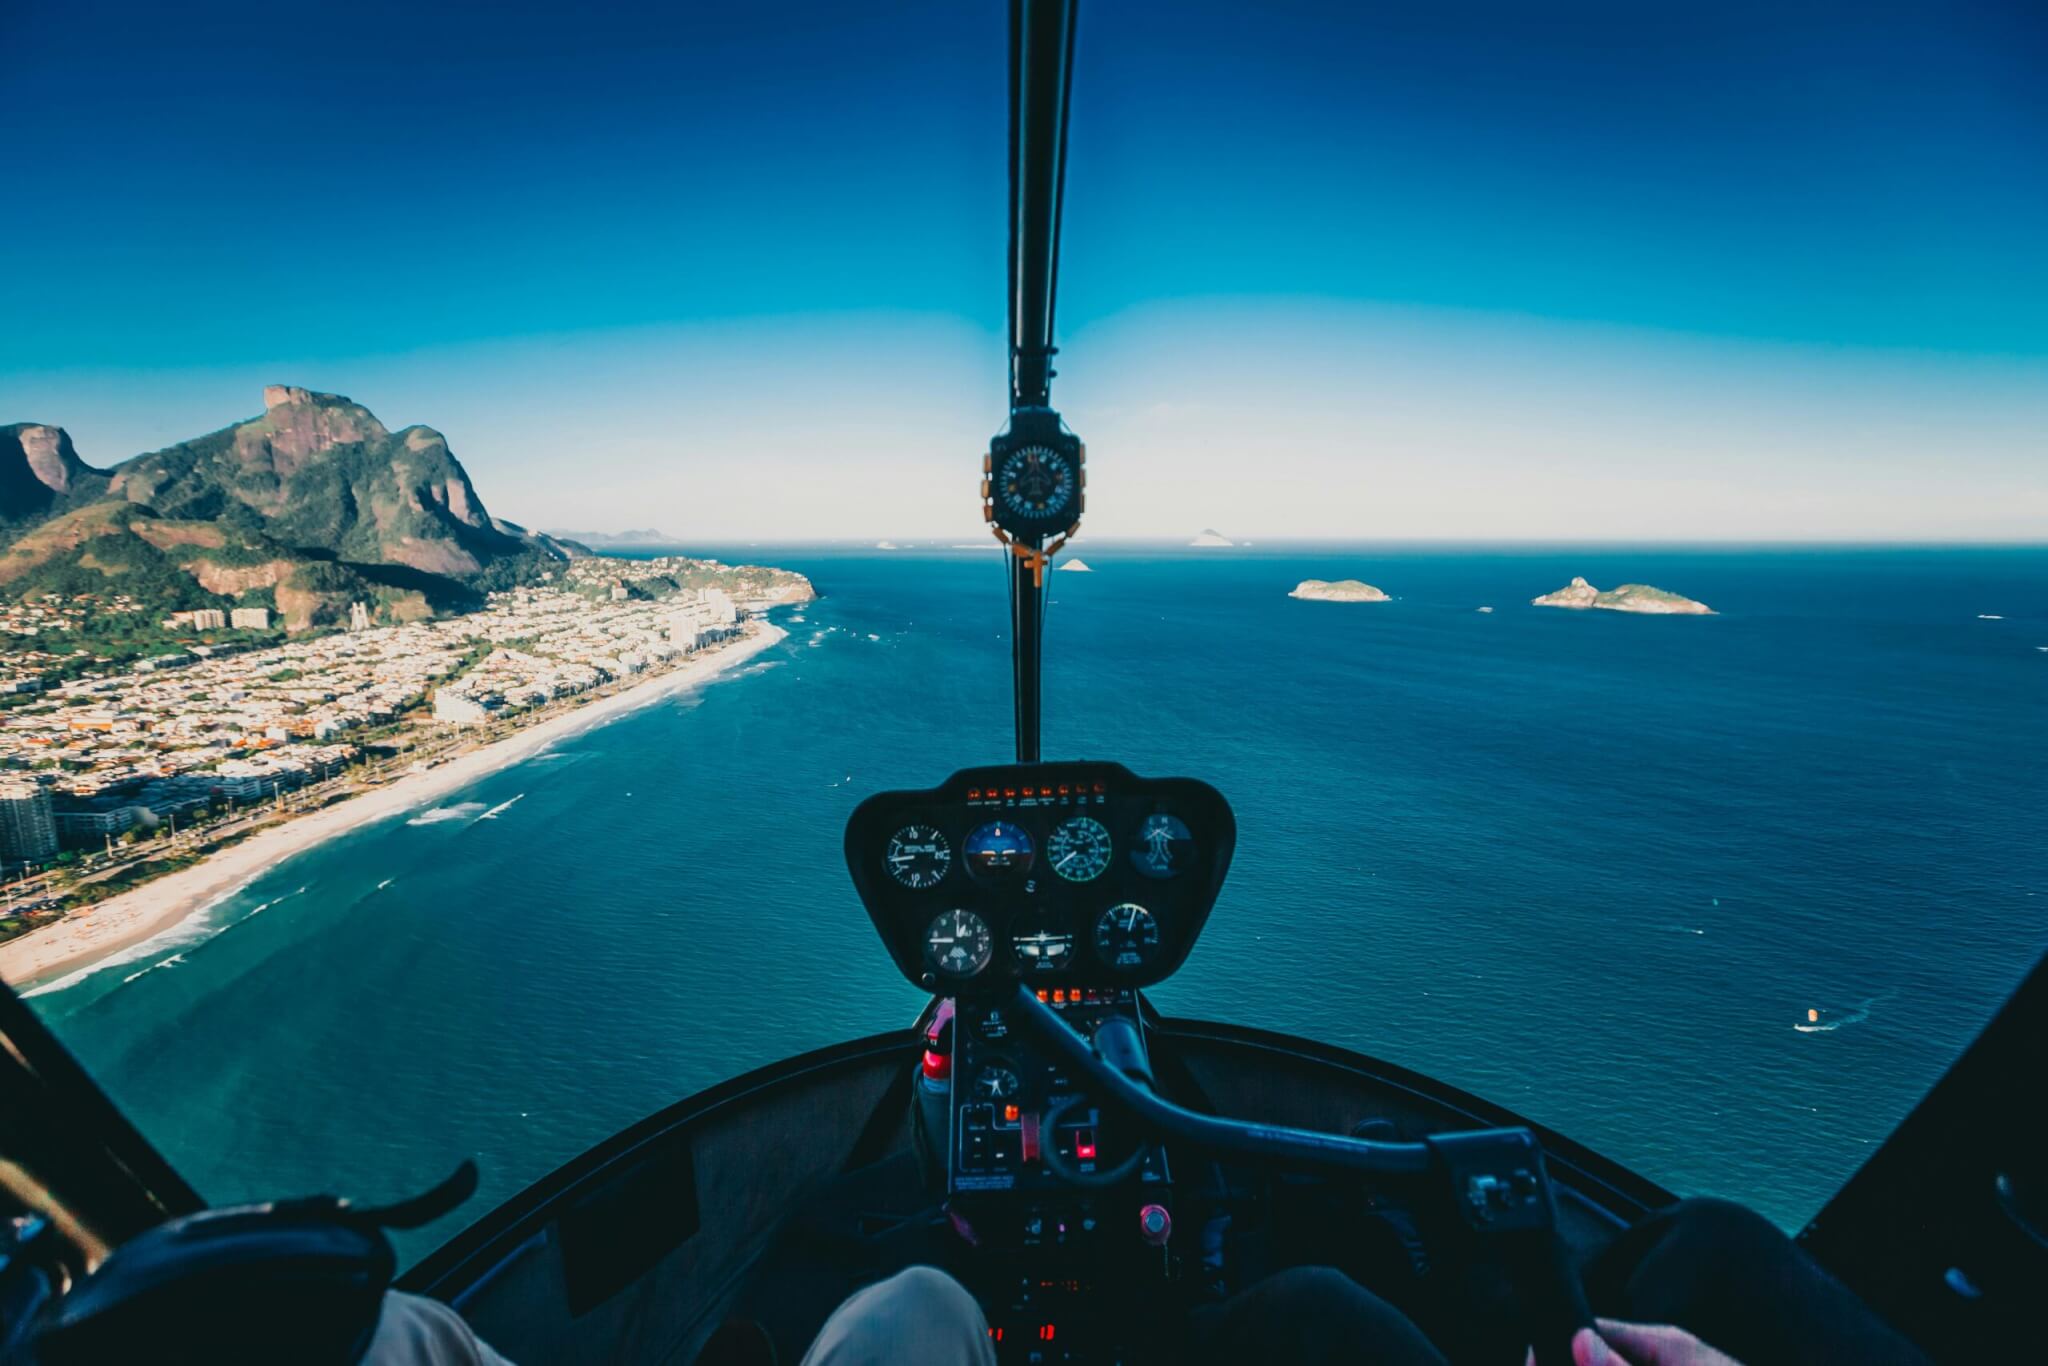 Photo of person flying a helicopter